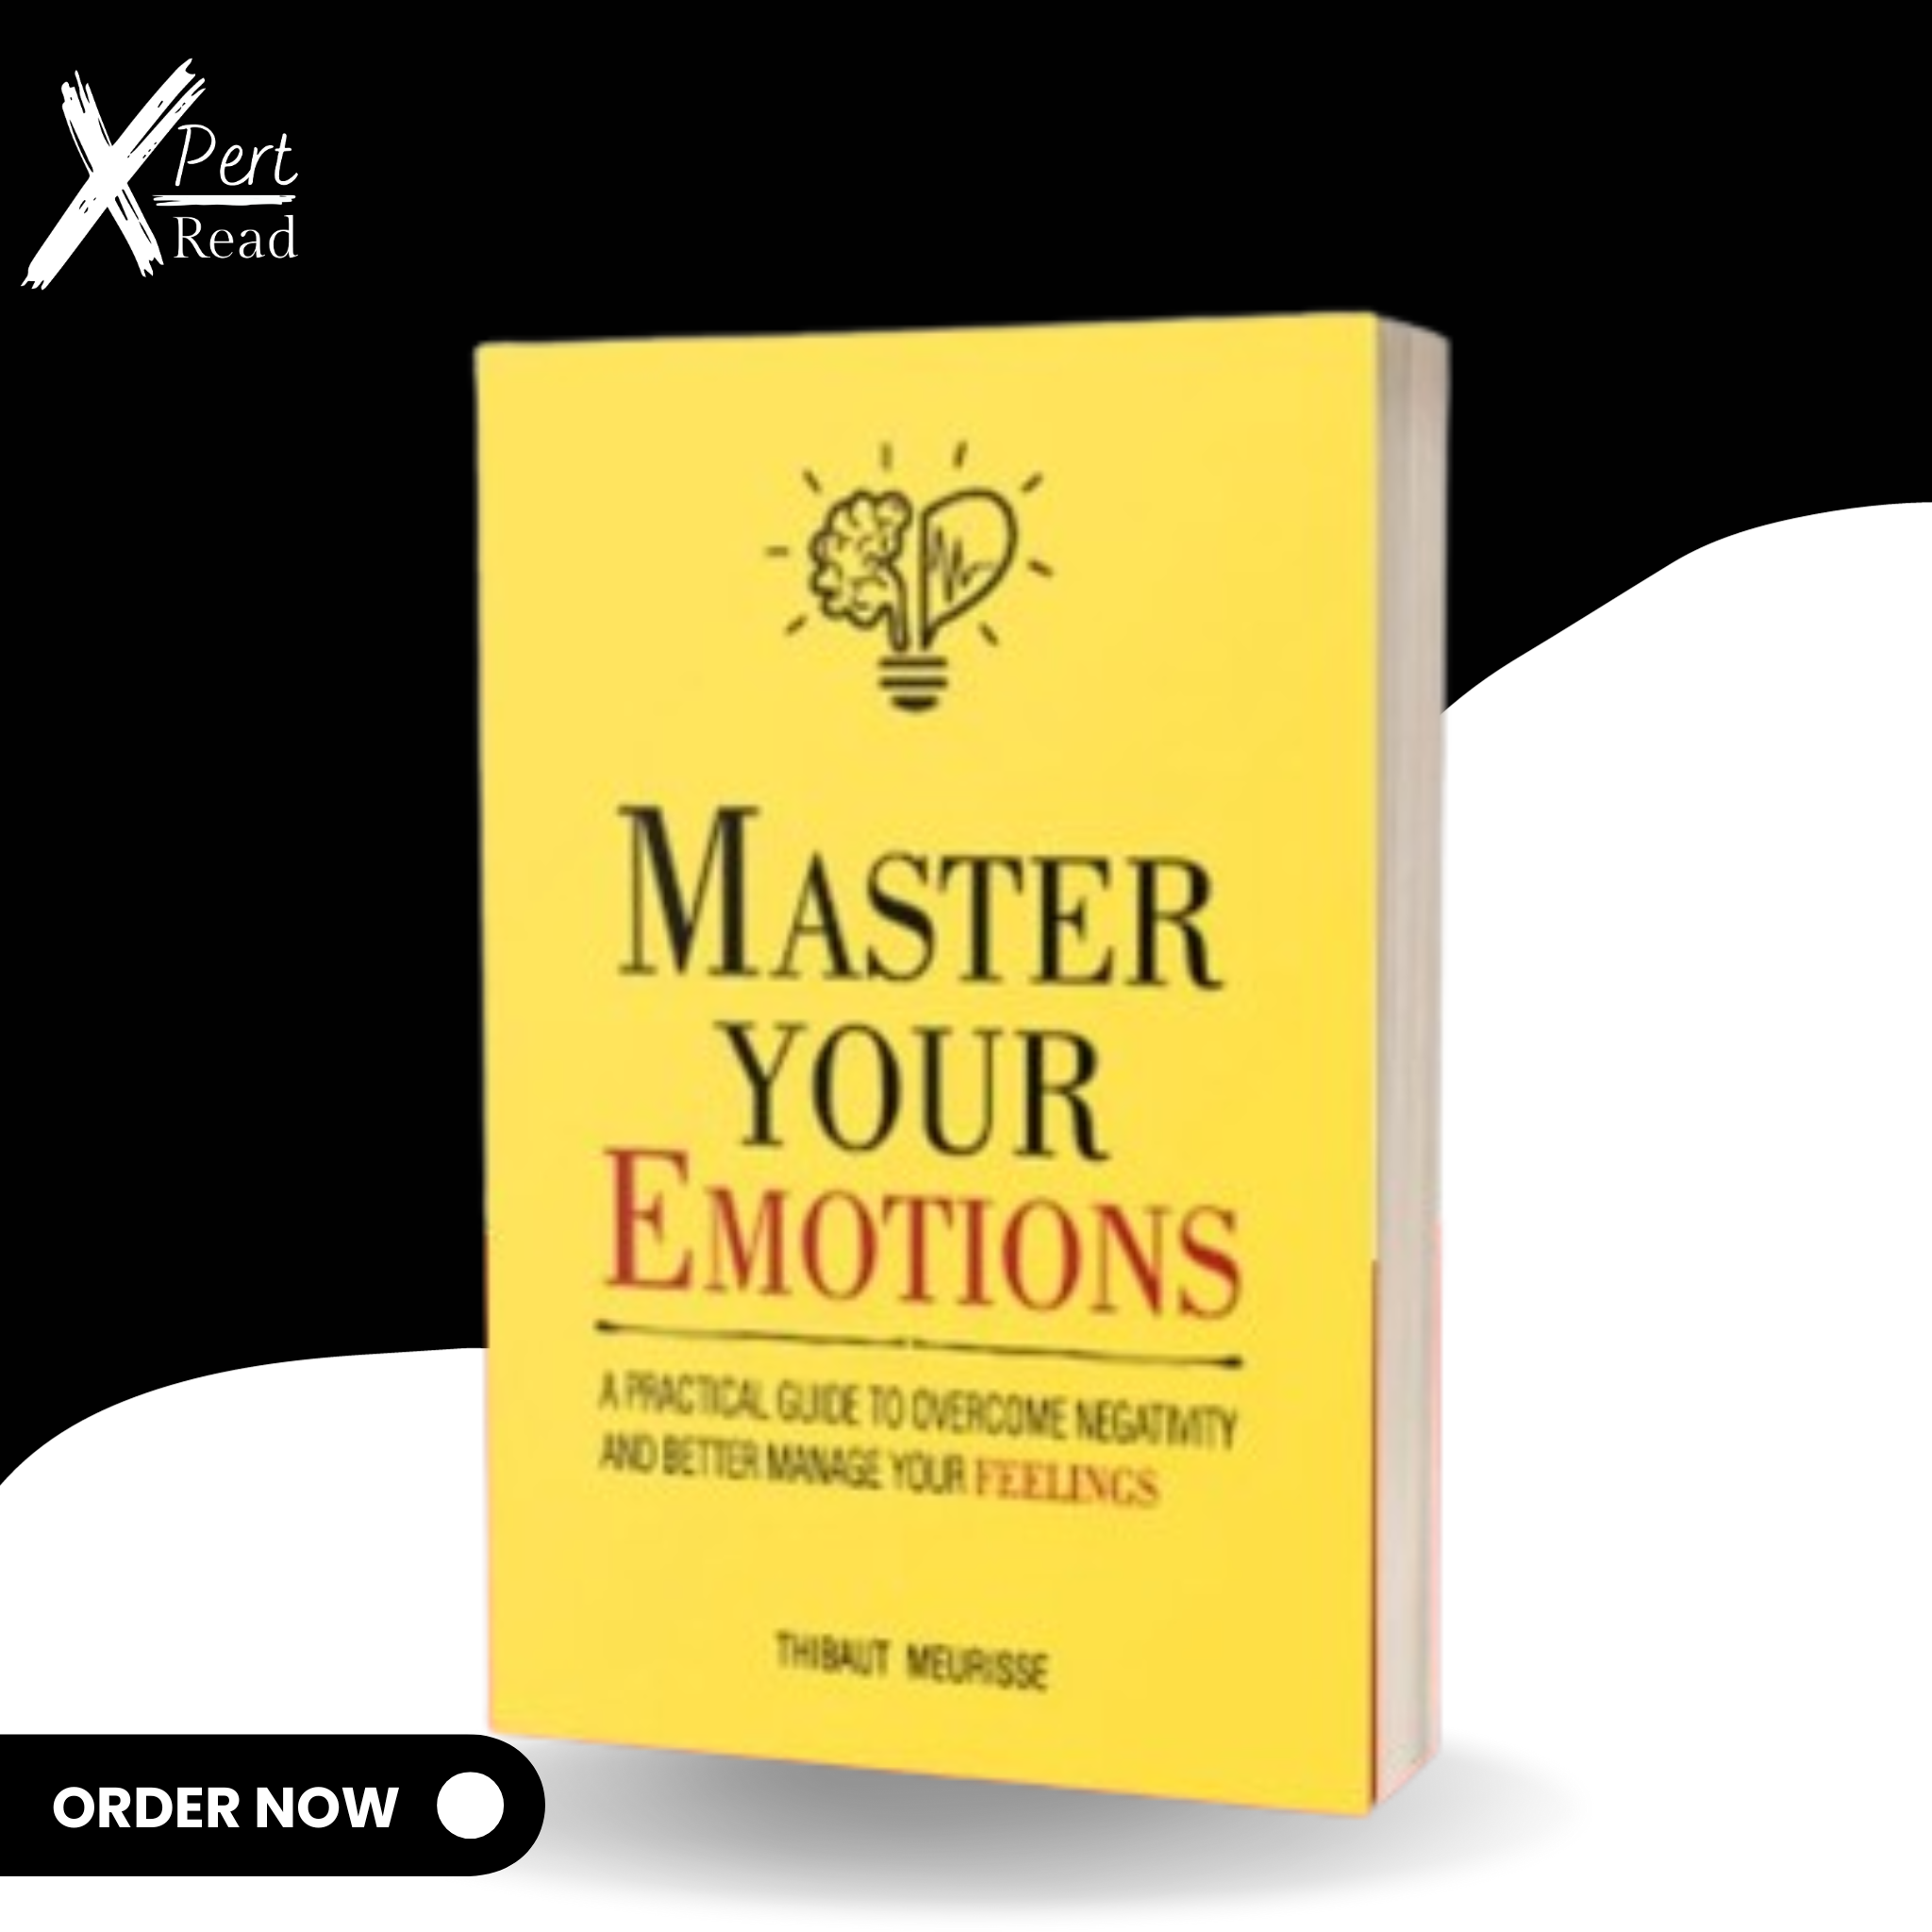 Master Your Emotions By THIBAUT MEURISSE